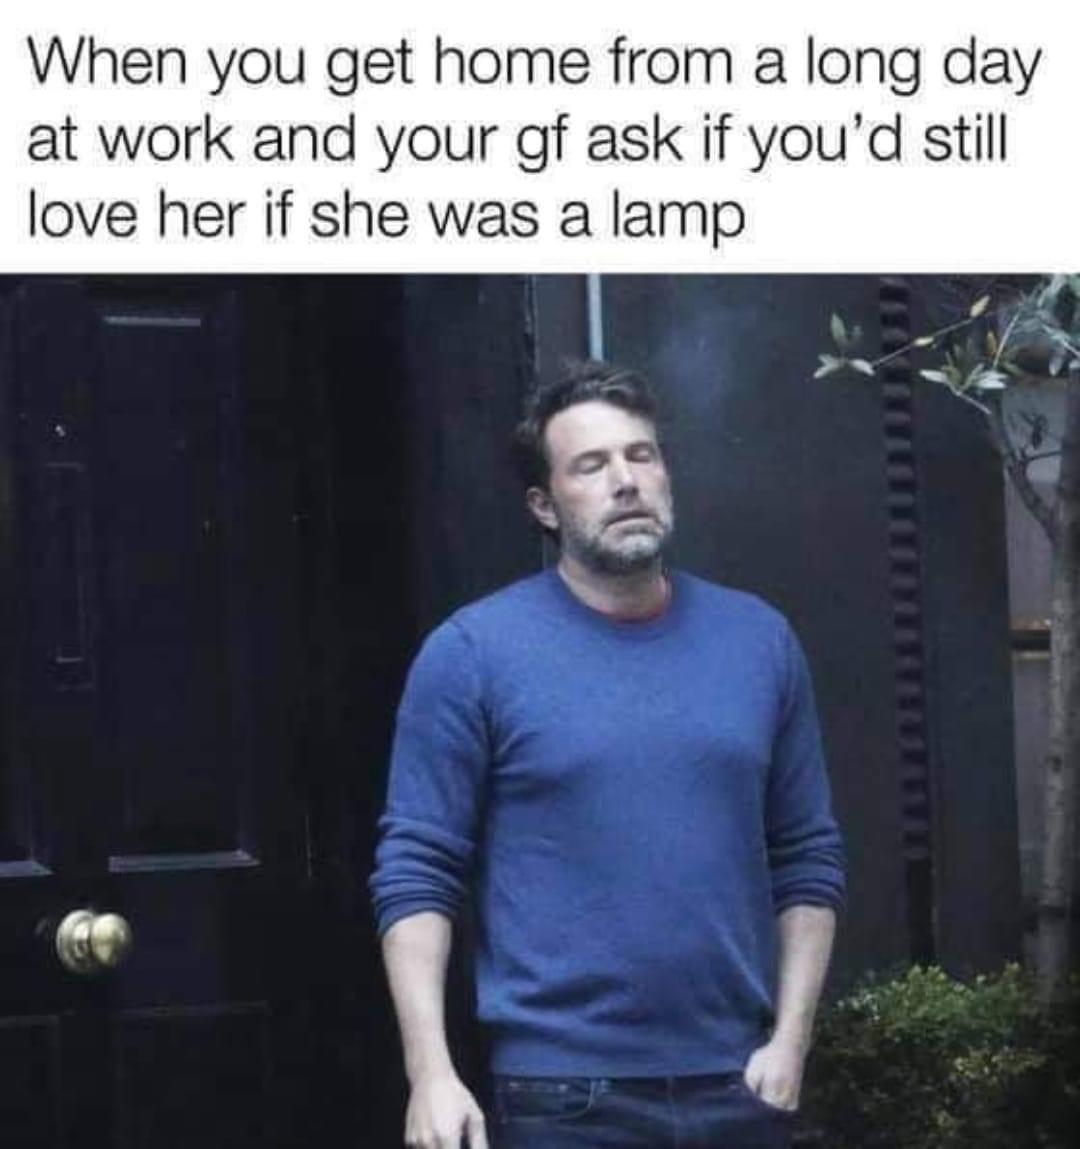 funny memes - best memes - me every time i leave a room after being super kind and bubbly - When you get home from a long day at work and your gf ask if you'd still love her if she was a lamp